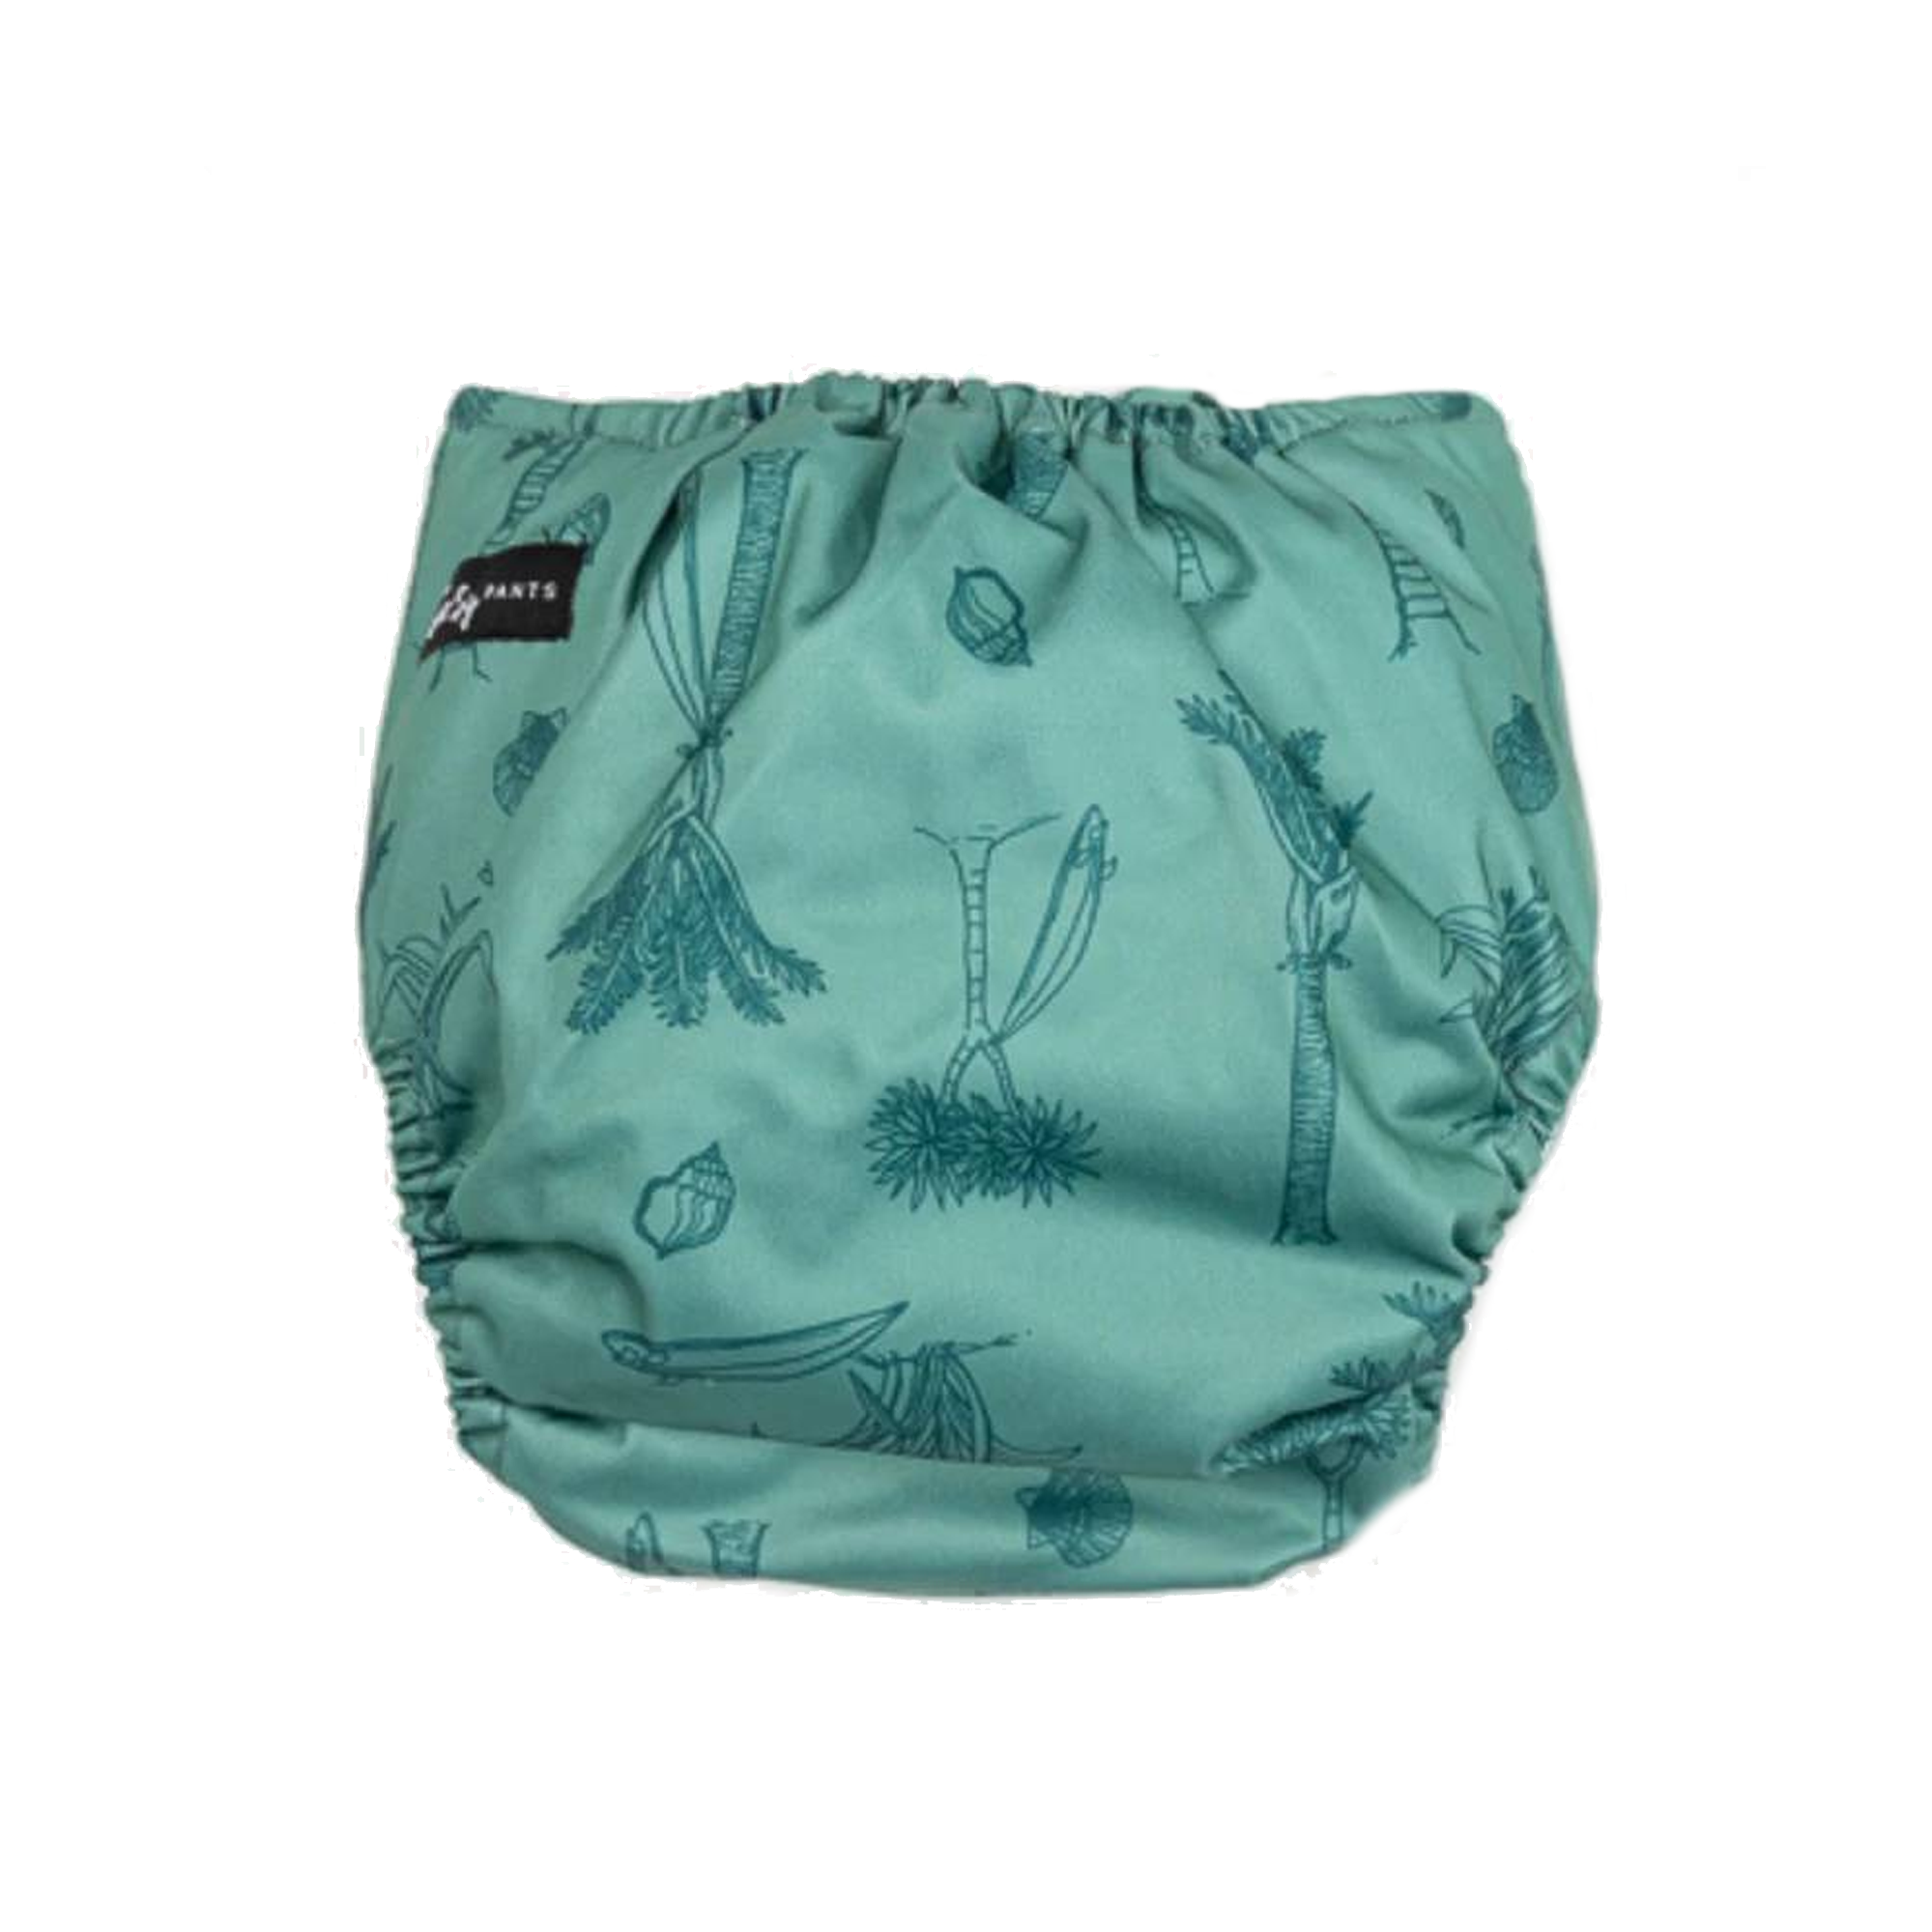 Sassy Snap Nappy with 2 Inserts - Surfs Up